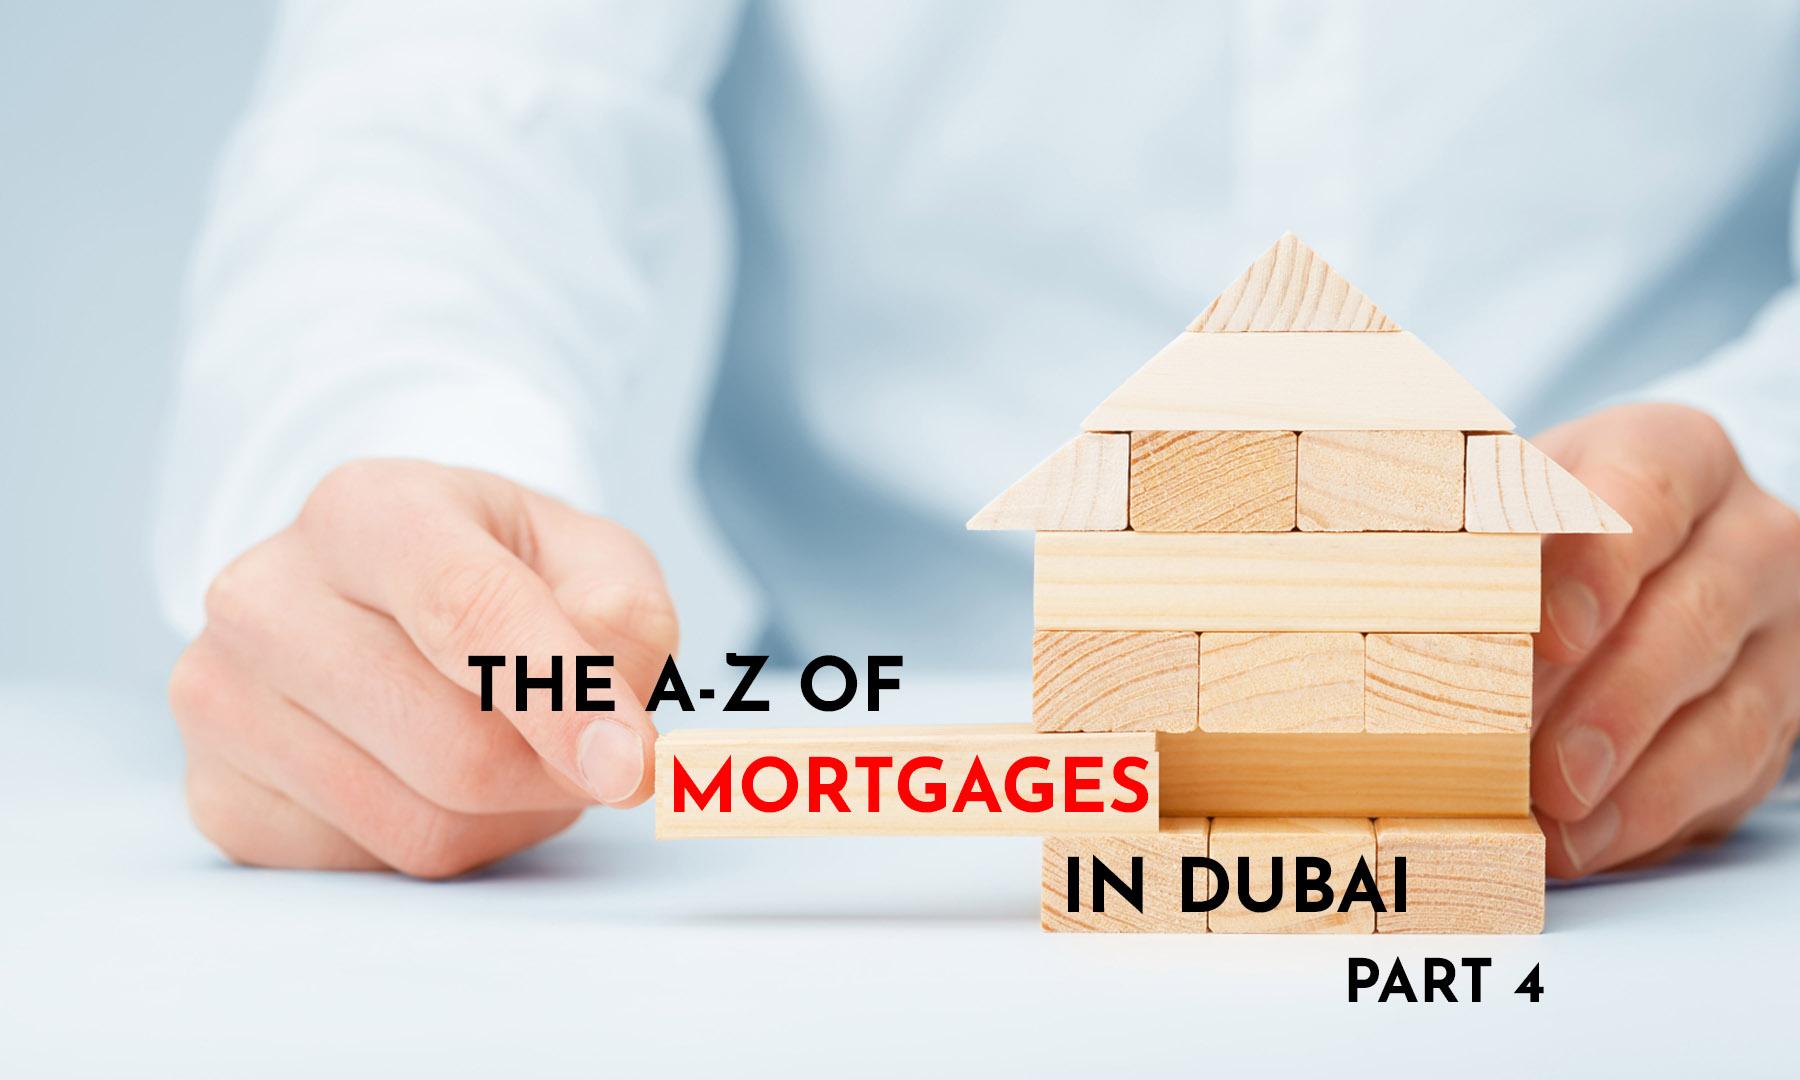 THE A-Z OF MORTGAGES IN DUBAI – Part 4